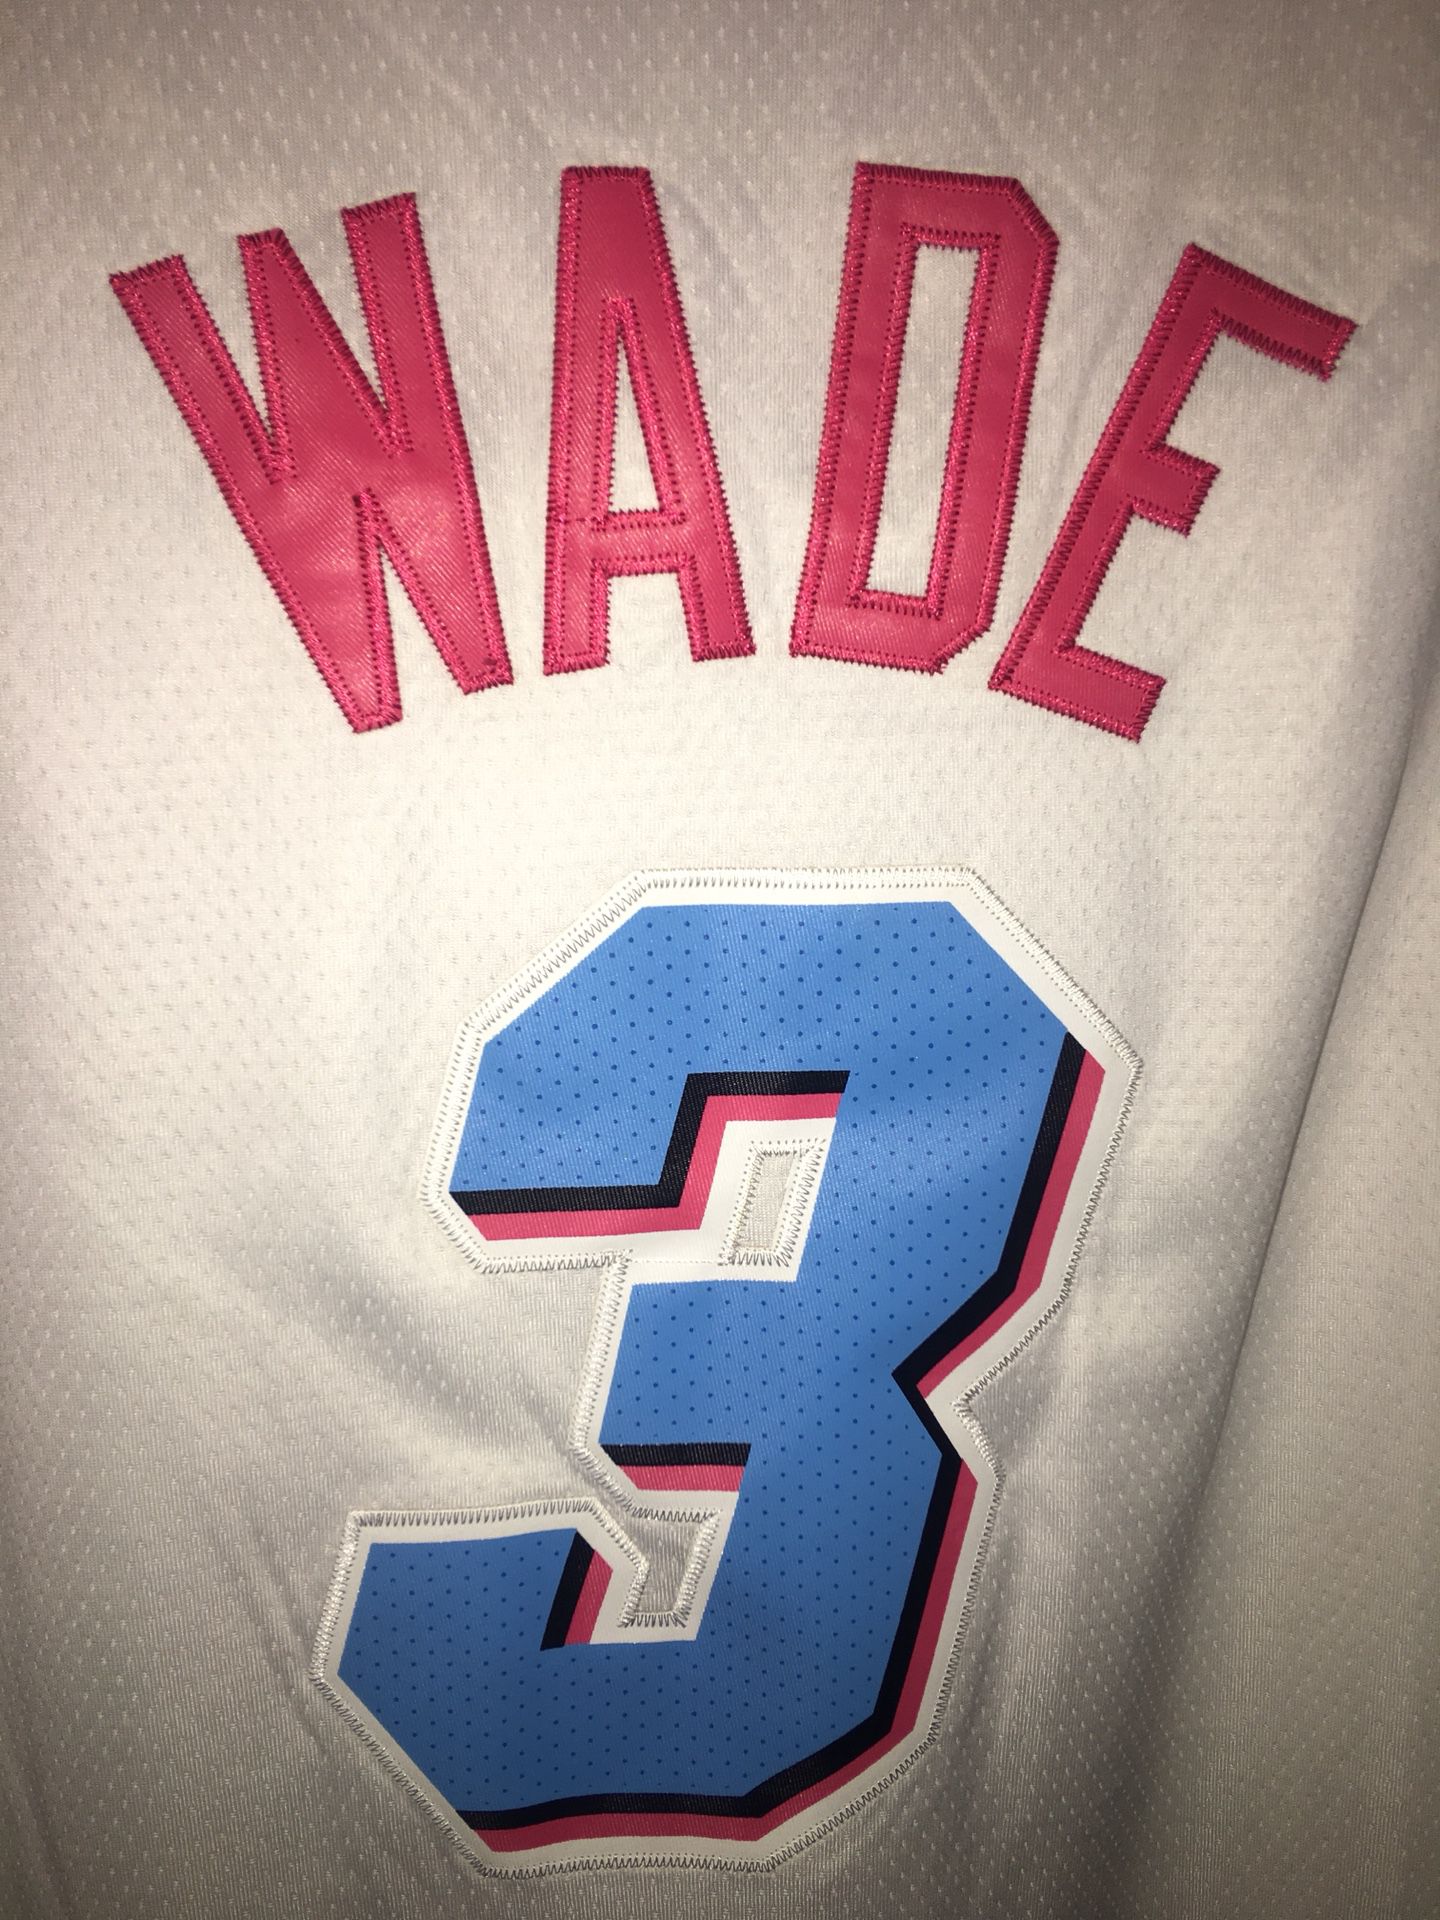 Miami Heat “D. Wade” Jersey (Miami Vice) for Sale in Hollywood, FL - OfferUp